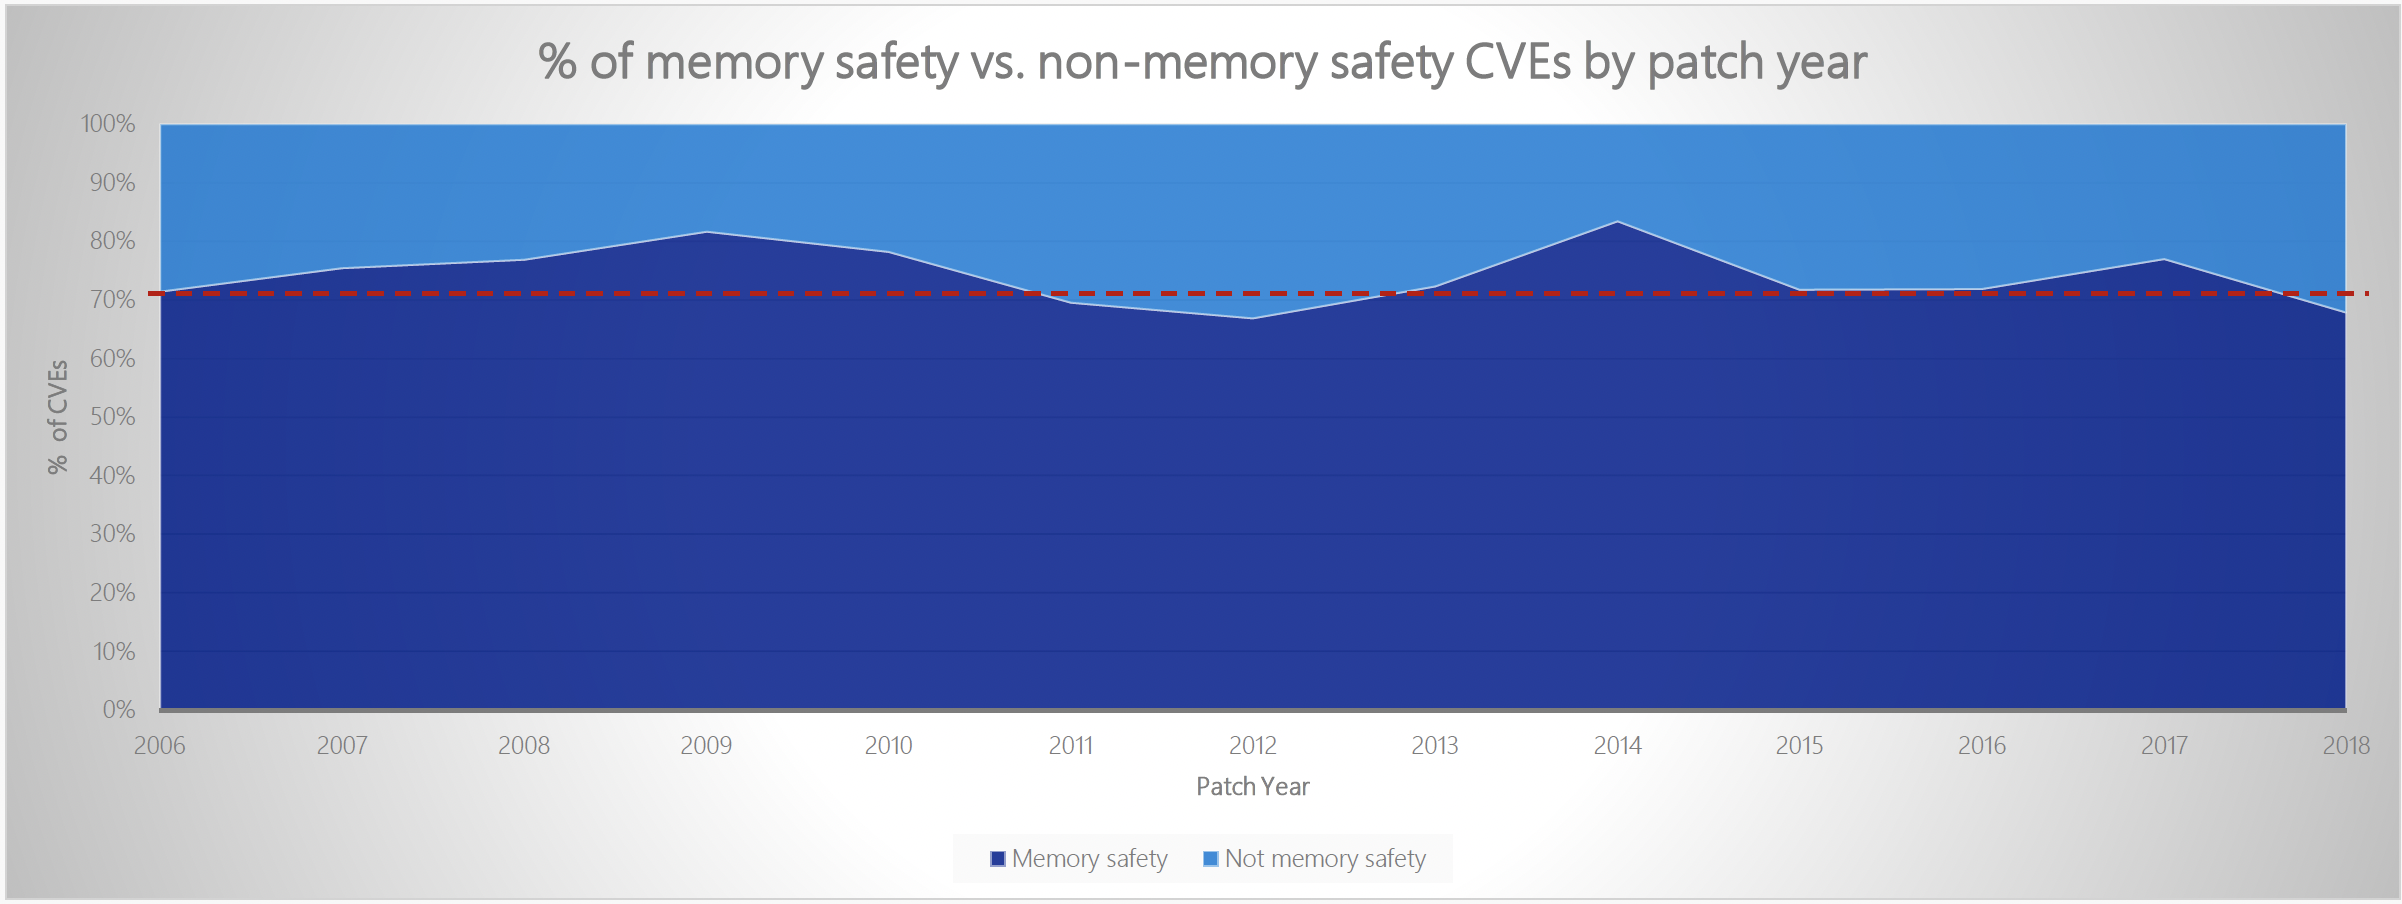 % of memory safety vs. non
memory safety CVEs by patch year